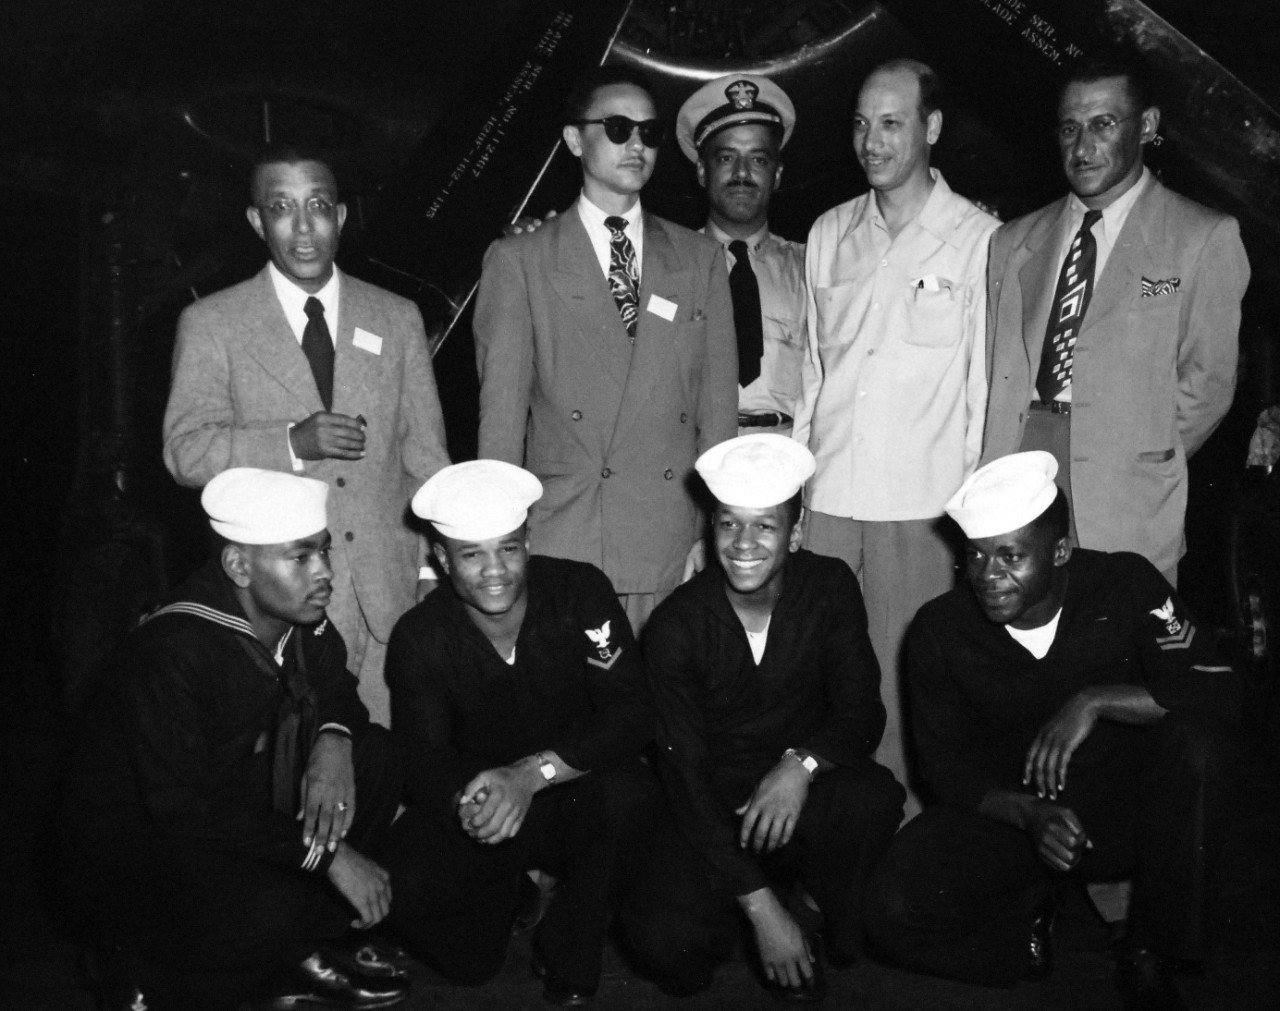 80-G-413549:   USS Midway (CVA-41), October 5, 1949.   Correspondents on board the aircraft carrier.  Back row, (left to right):  Mr. C. Murphy; MR. R. Ratcliff; Lieutenant D.D. Nelson; Mr. T.W. Young; and Mr. D. H. Davis.  Front row, (left to right): ABAN F.A. Epps; RD3 J.E. Dulaney; SN H.N. Turner; and BM2 J.J. Pratt.   Official U.S. Navy Photograph, now in the collections of the National Archives.  